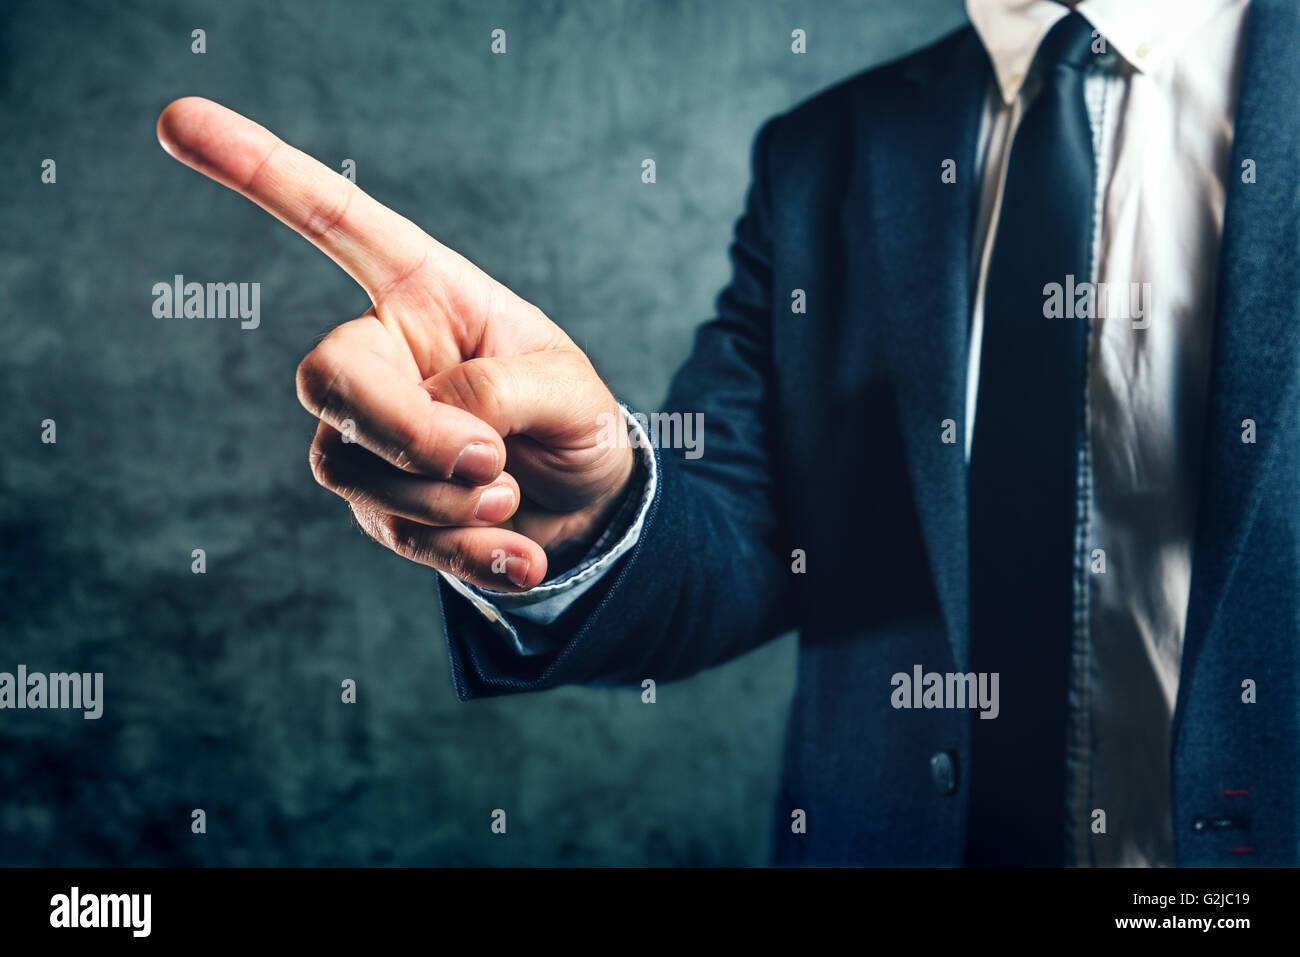 Getting fired from job, office manager showing way out with finger pointing to exit door. Stock Photo